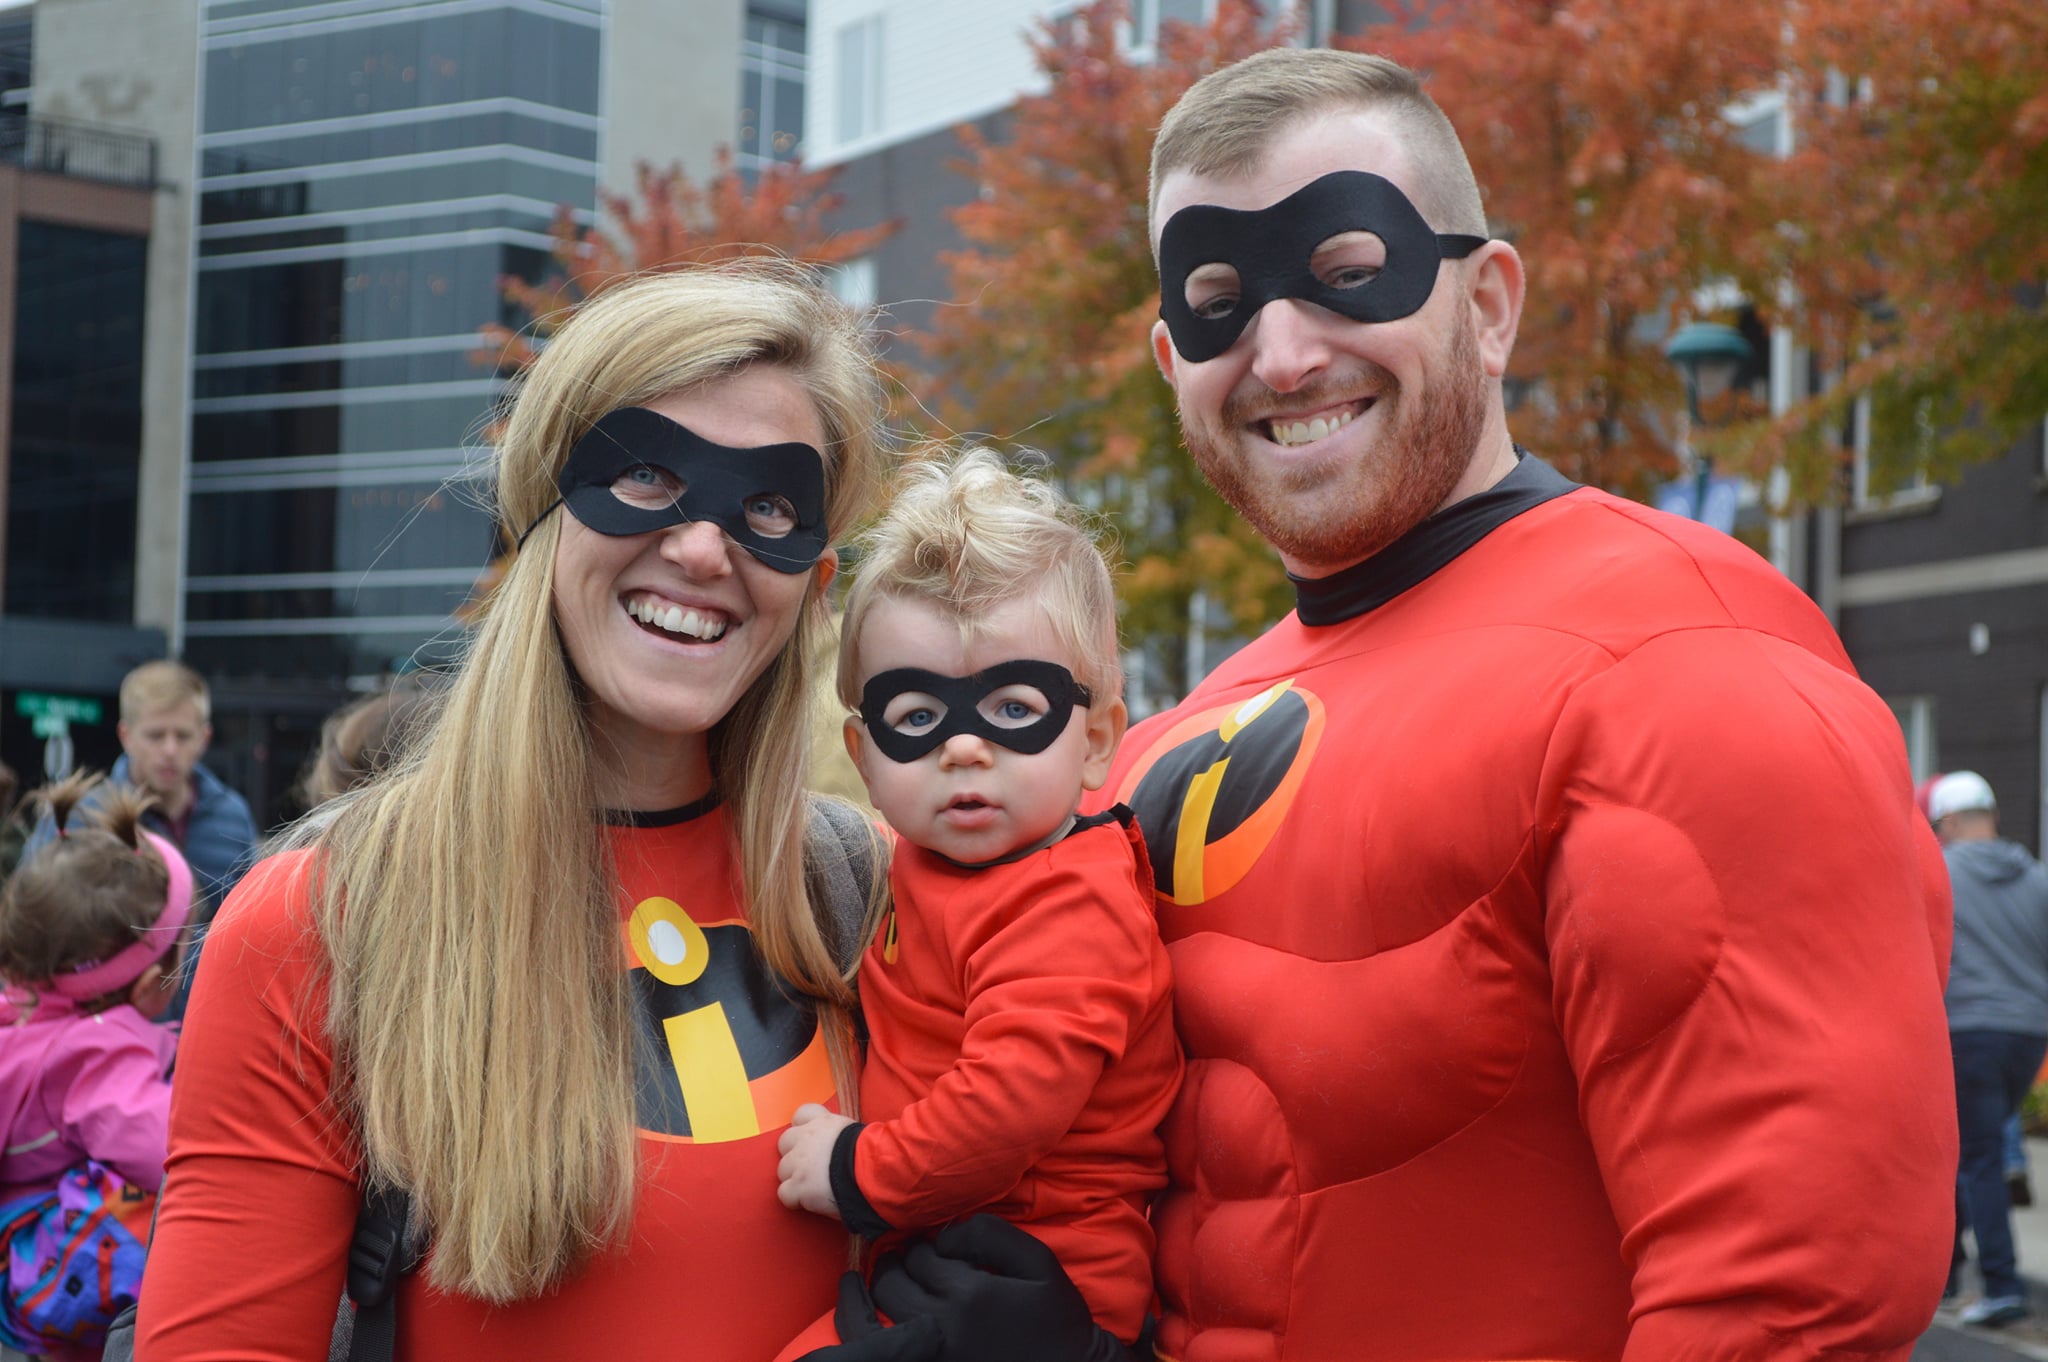 Woman, baby and man in red costumes smiling